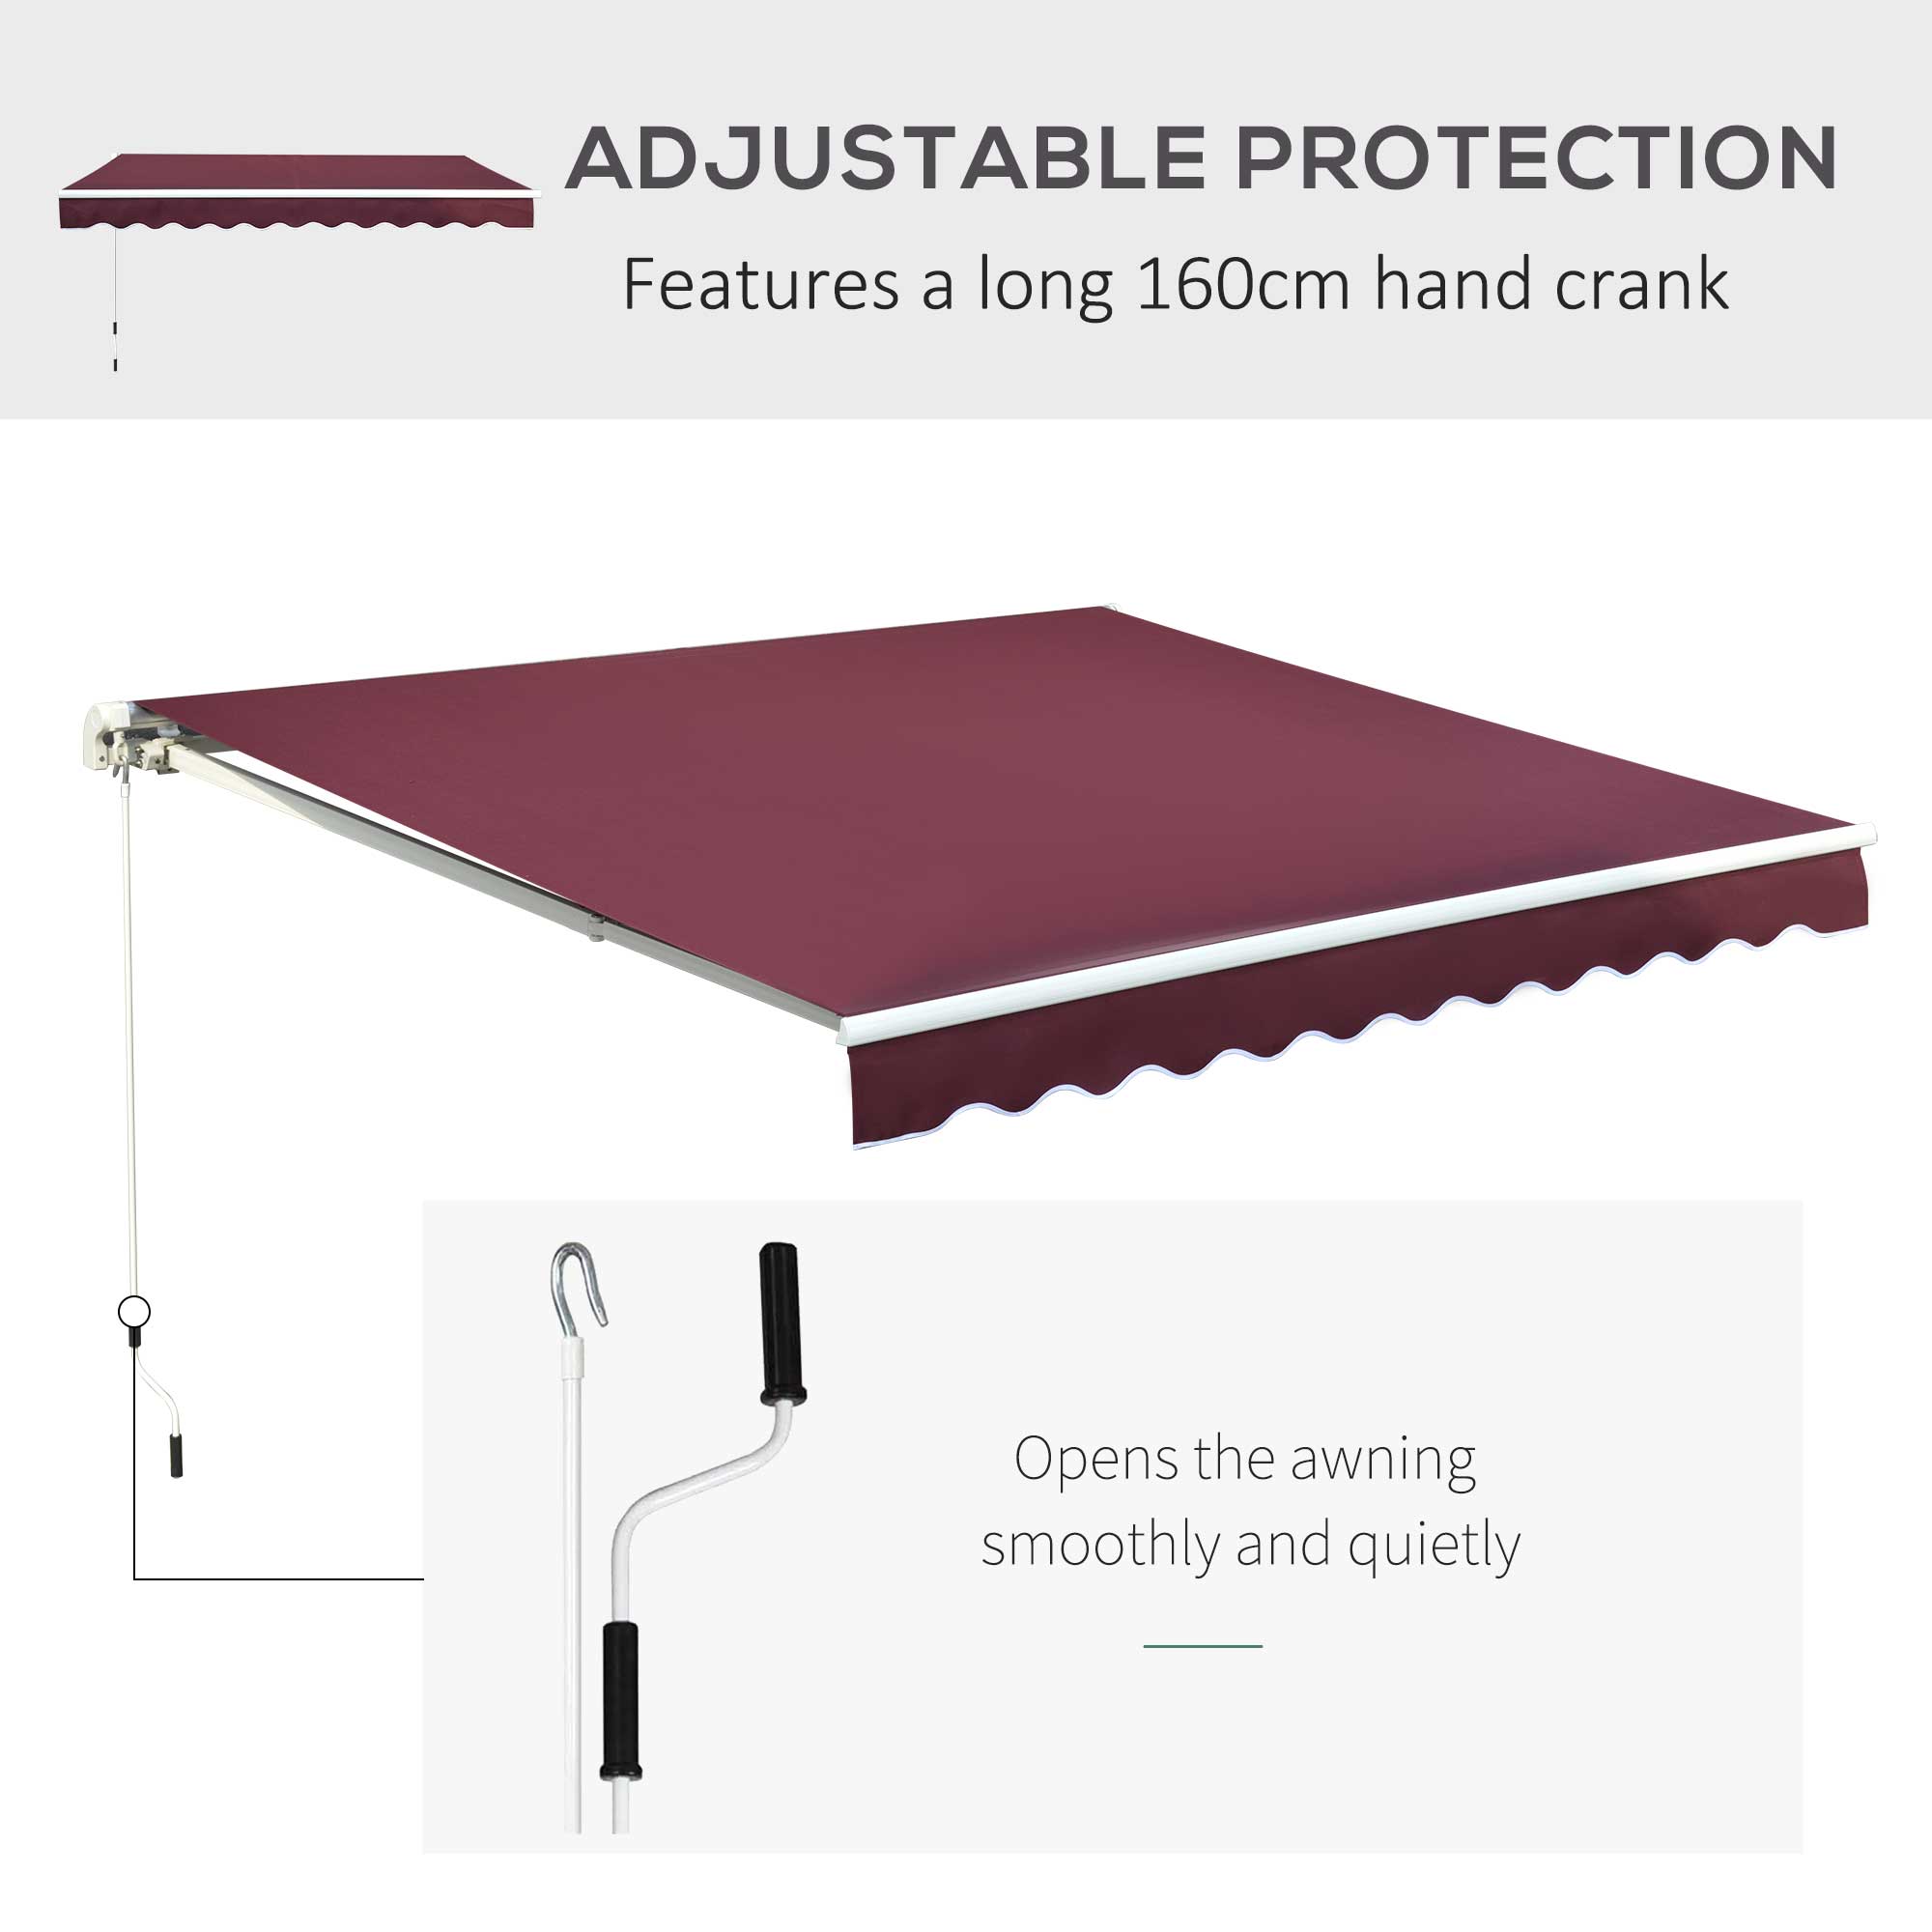 Outsunny Garden Patio Manual Retractable Awning Canopy Sun Shade Shelter, 3x2.5 m-Red - Inspirely